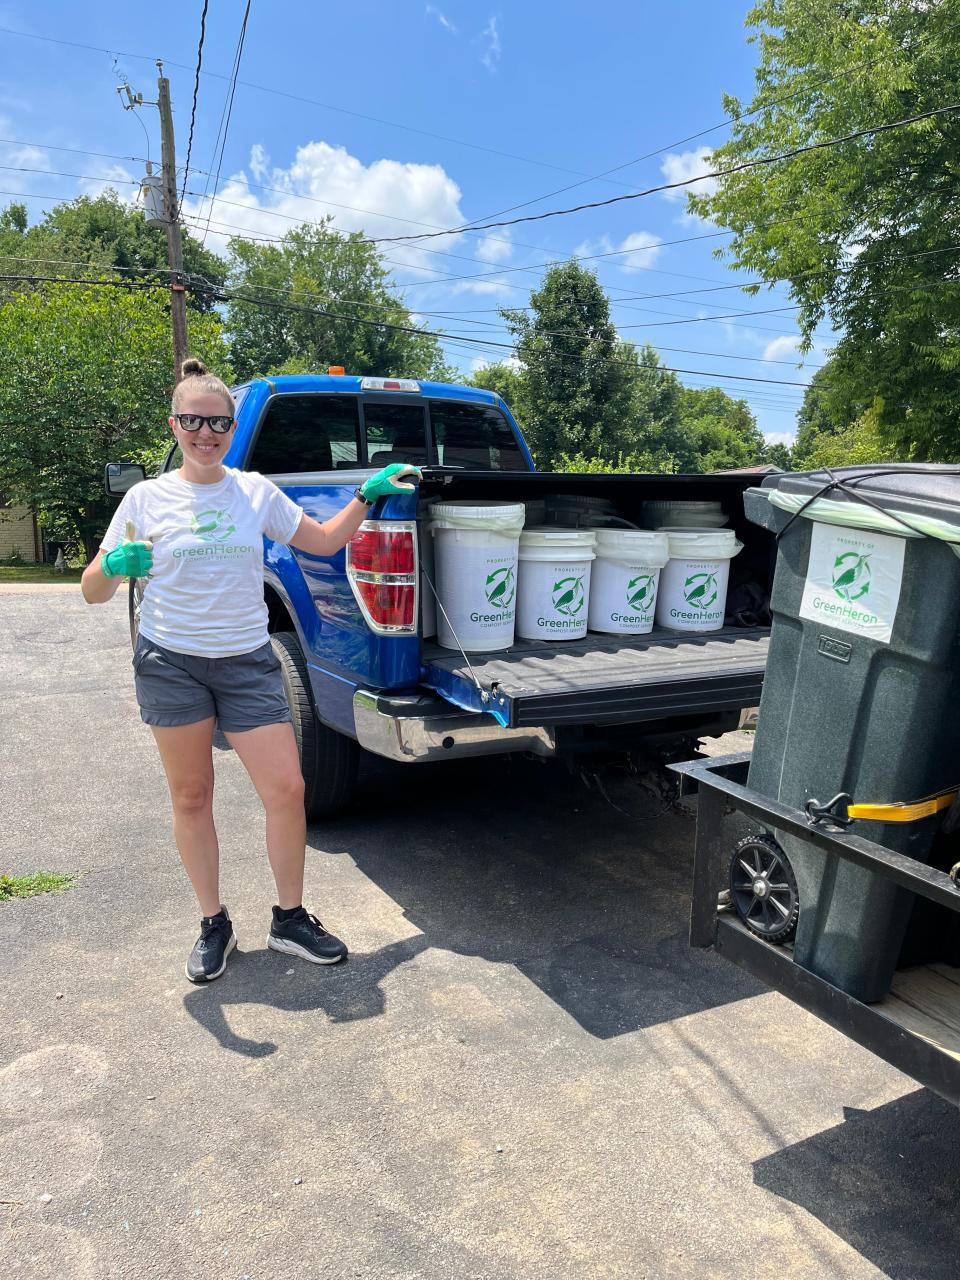 Kat McDearis, co-founder of Green Heron Composting Service, on her daily collection route with “Blue Steel,” the company’s truck. 2022